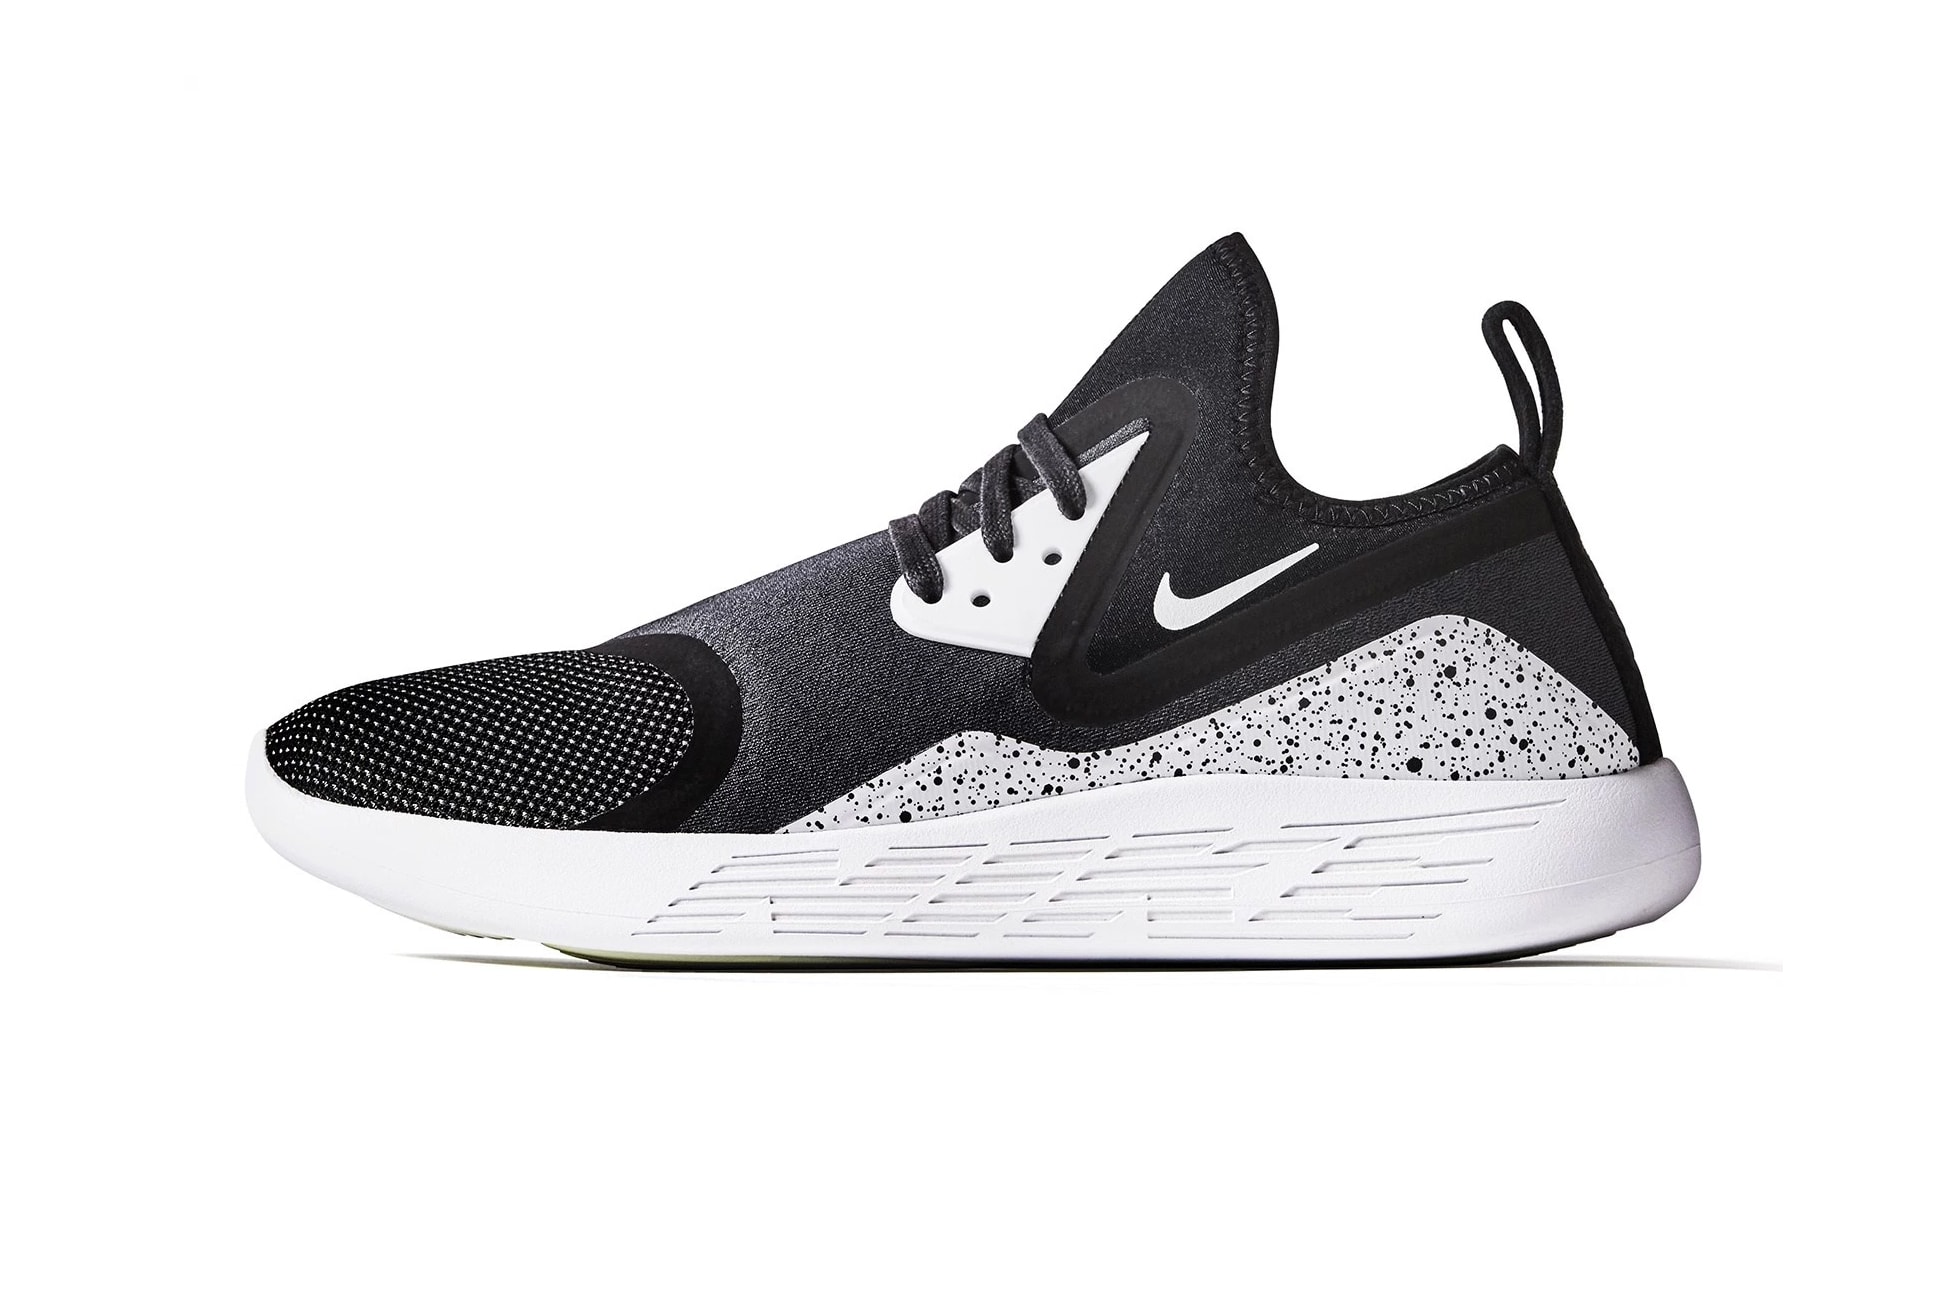 Nike LunarCharge Official Look